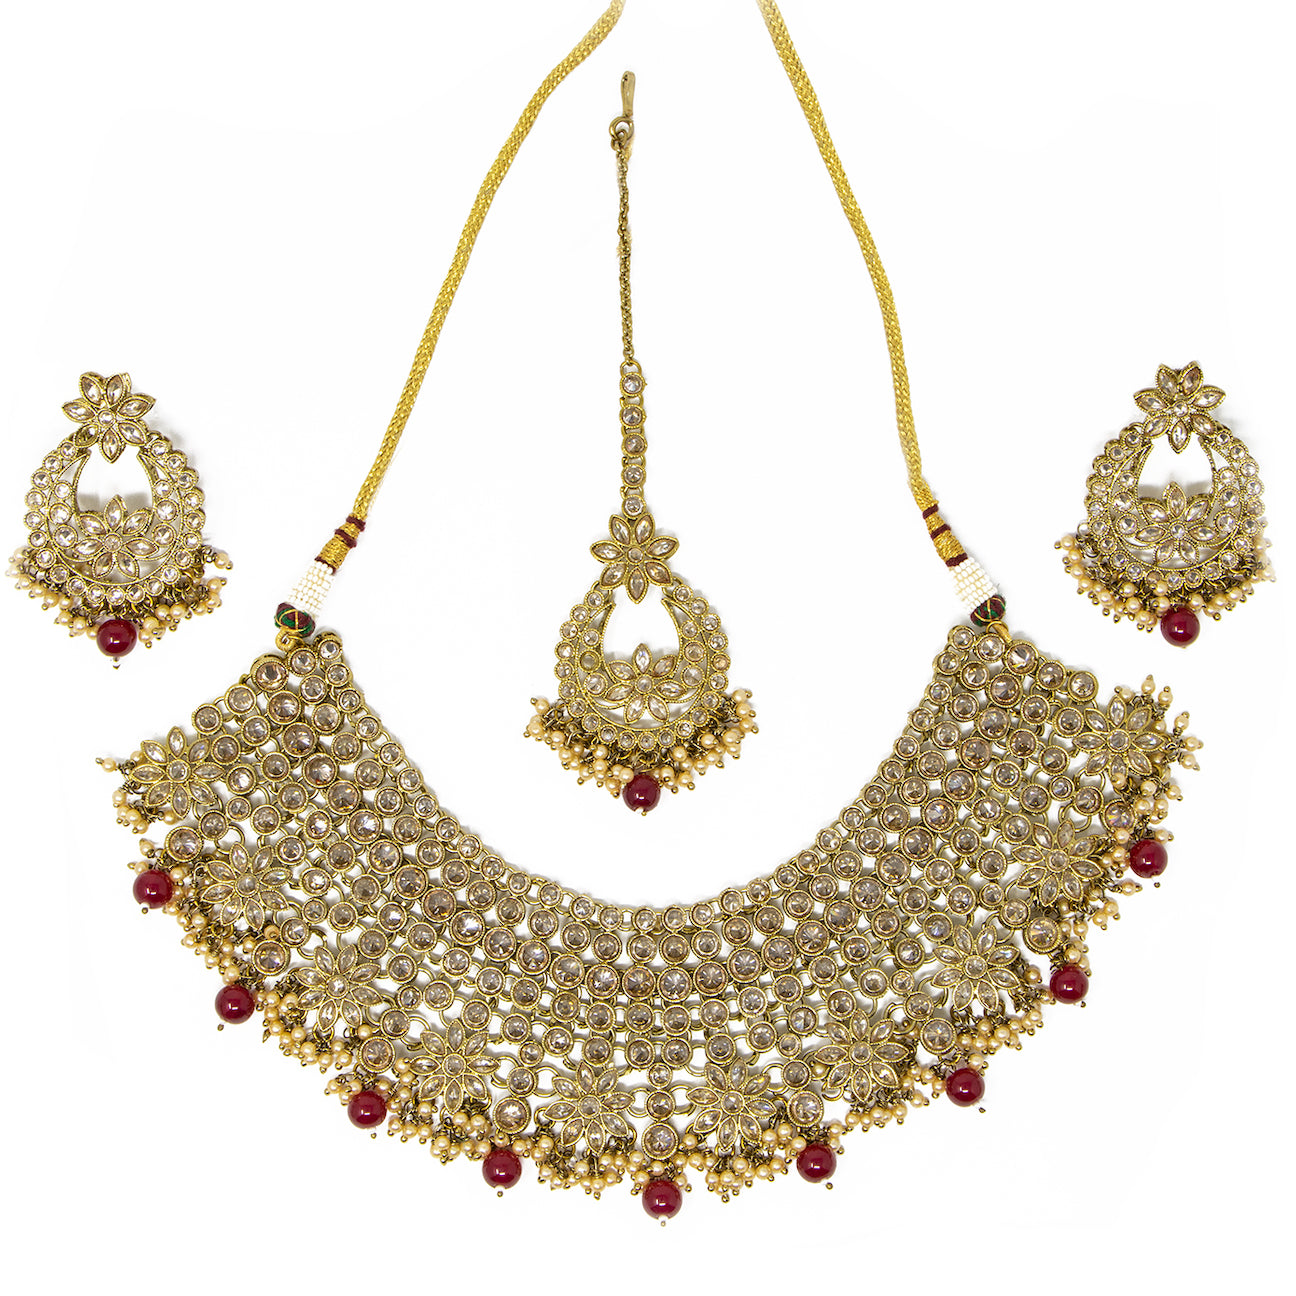 Red and Gold  Set of three pieces: a necklace, earrings, and bindi (forehead piece)